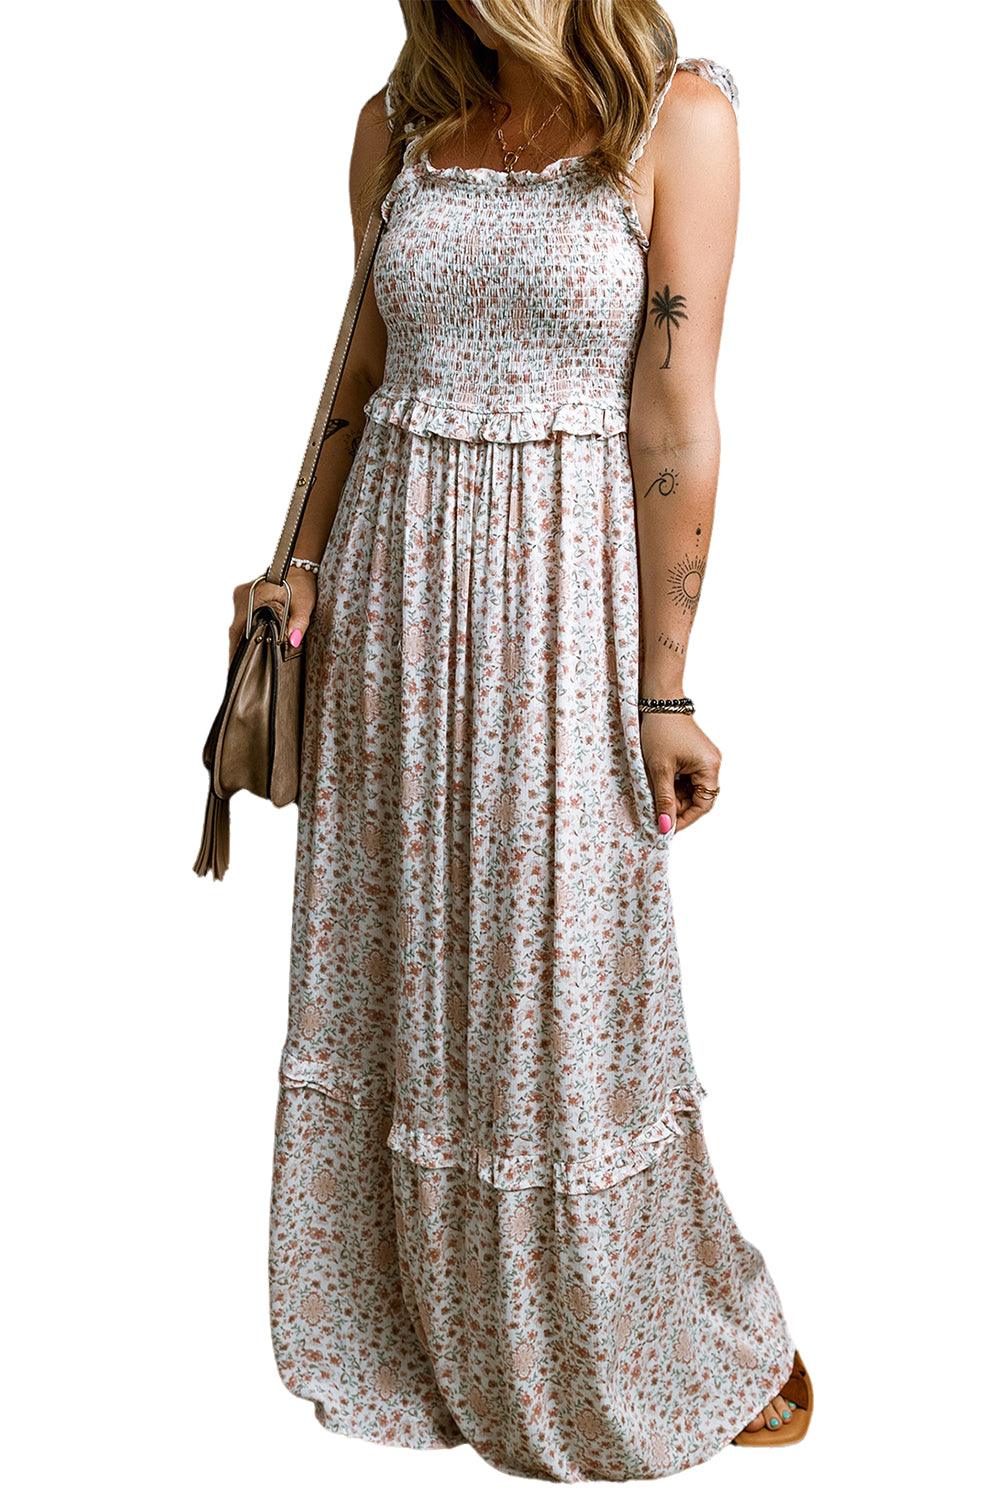 White Lace Frilly Straps Shirred Floral Maxi Dress - L & M Kee, LLC